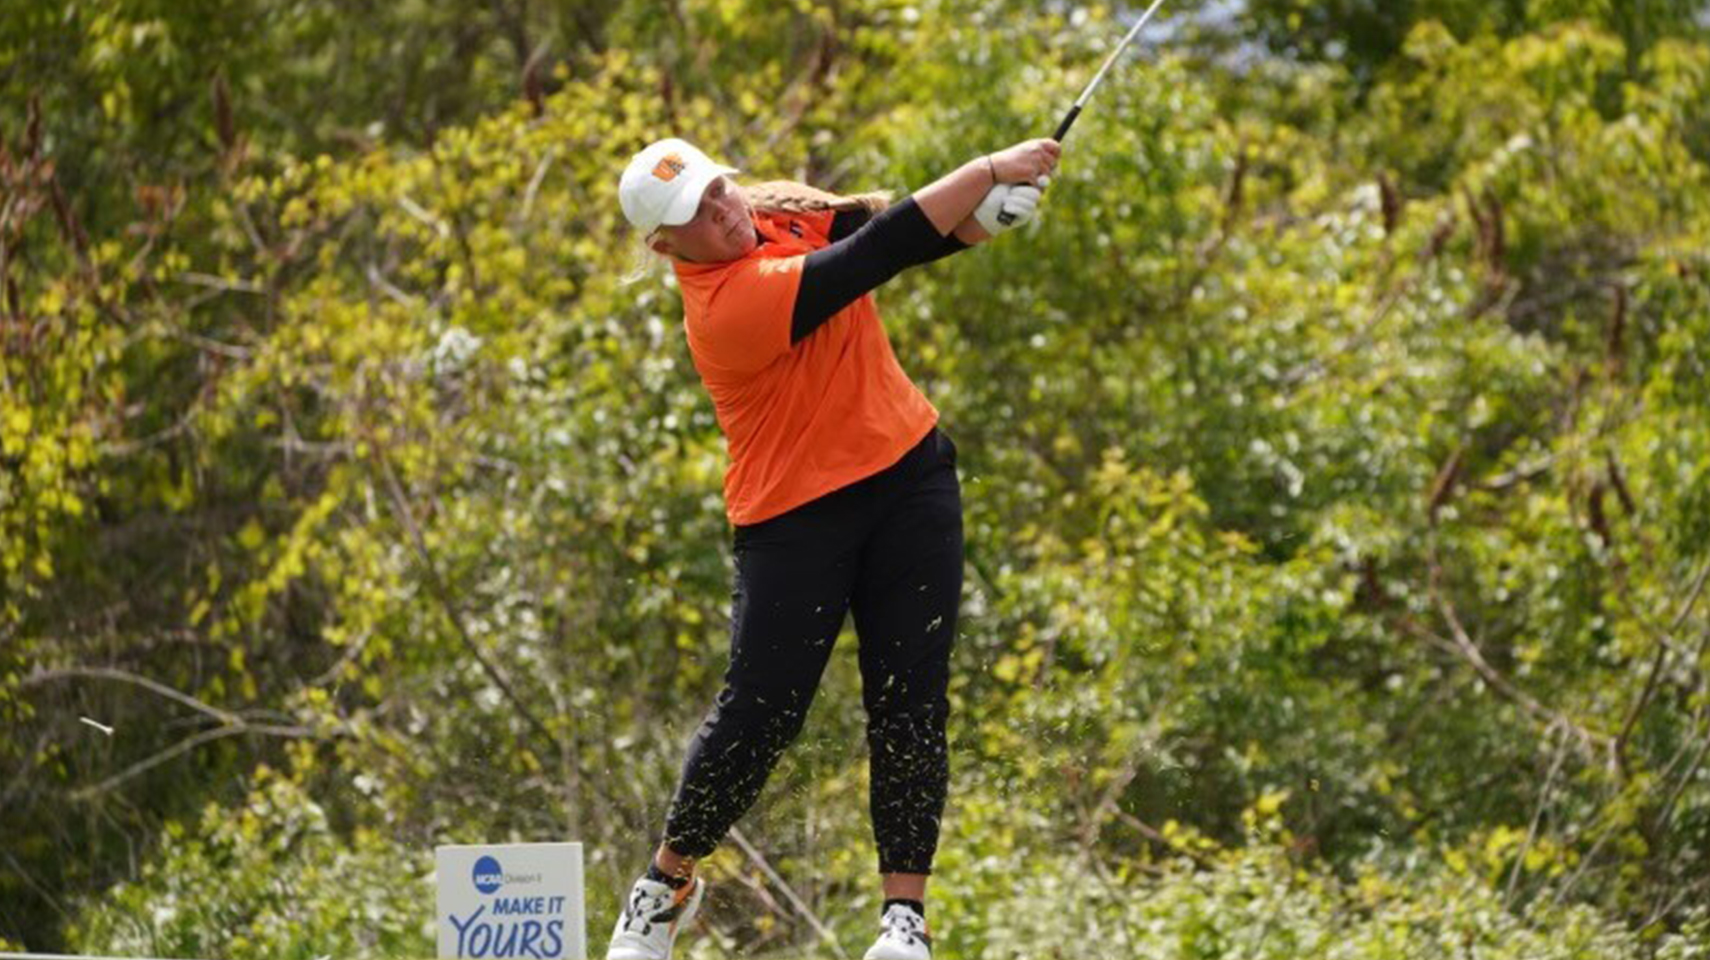 Women's golfer in orange hitting off the tee at the national championship